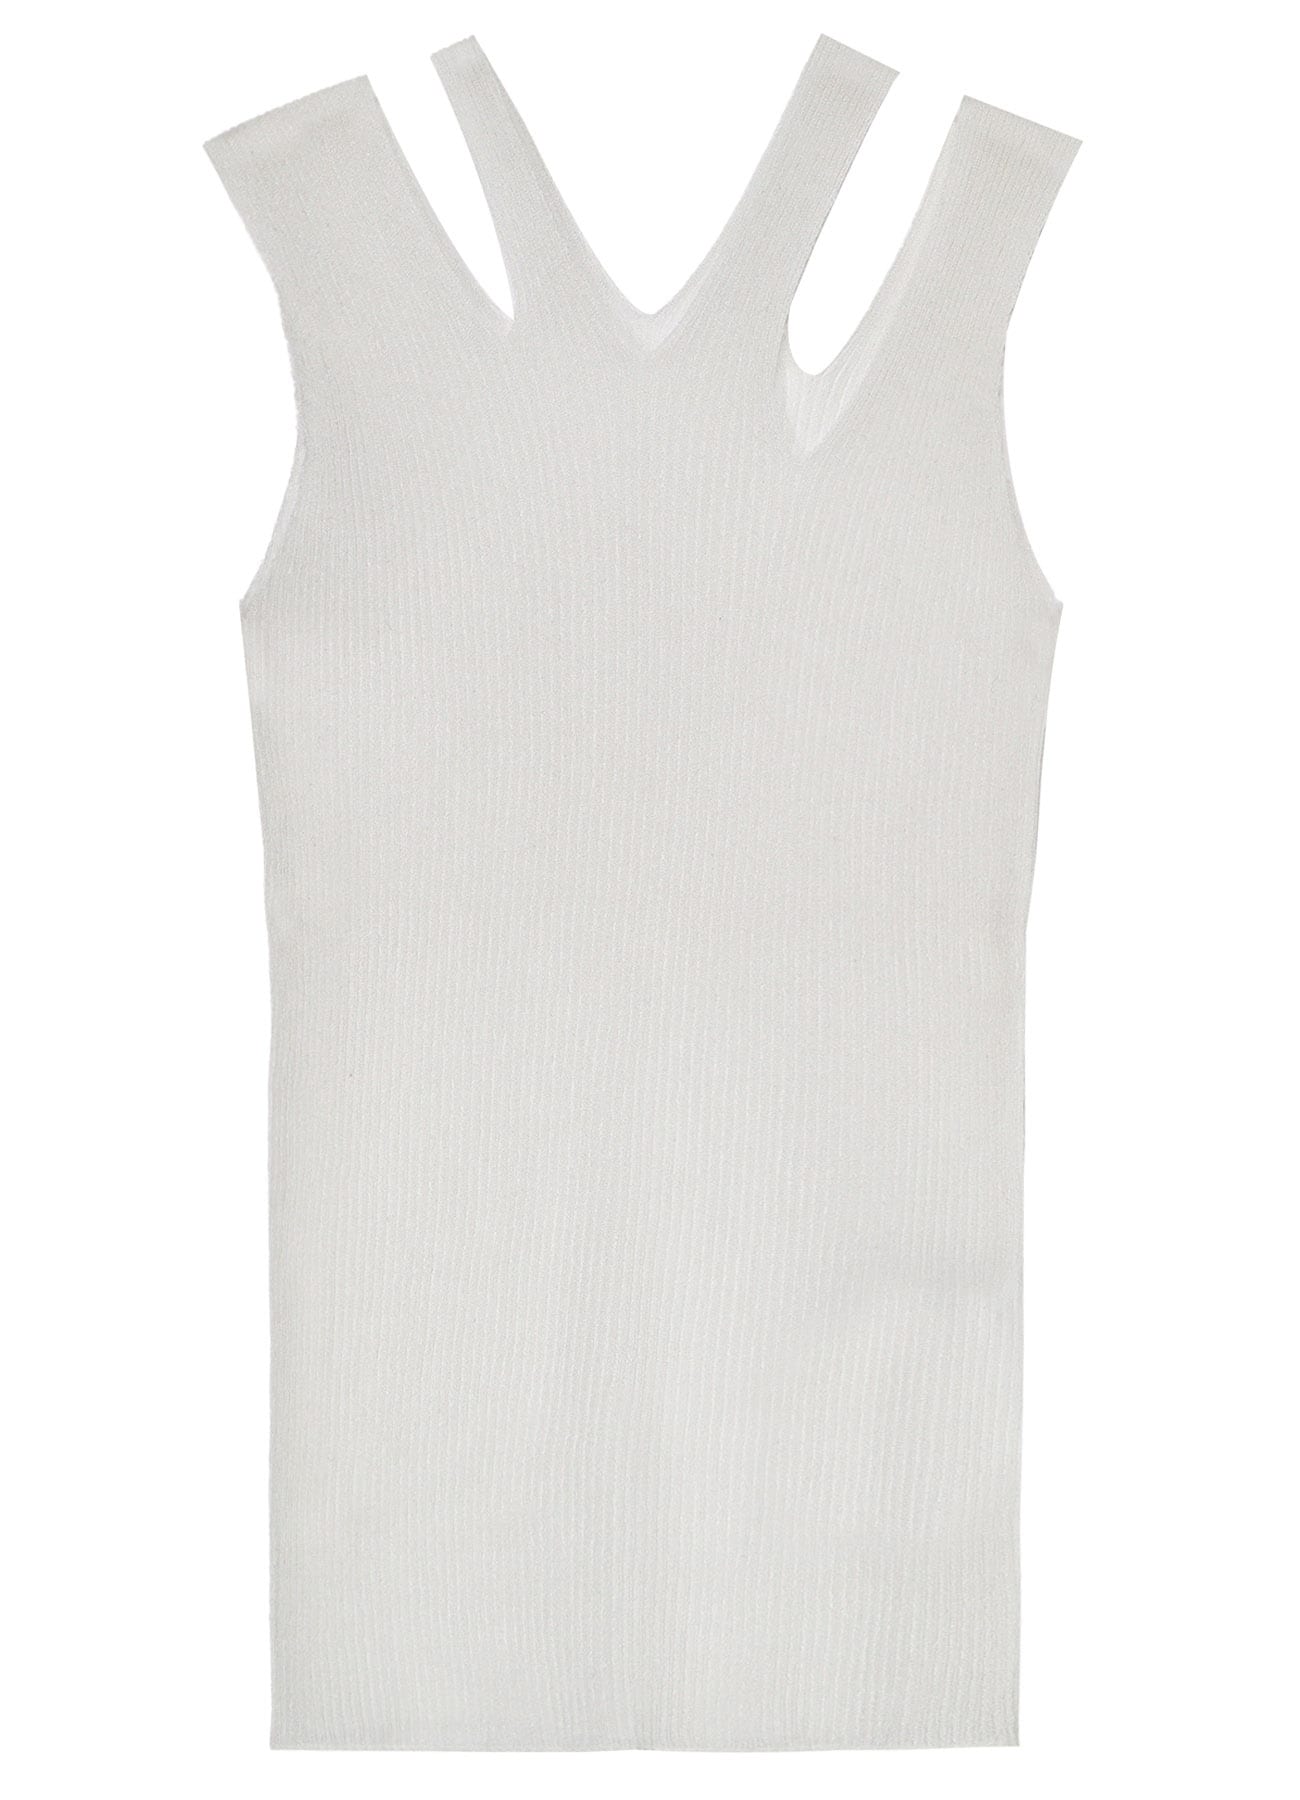 12G 3*3 RIB collections SLEEVELESS TOP A